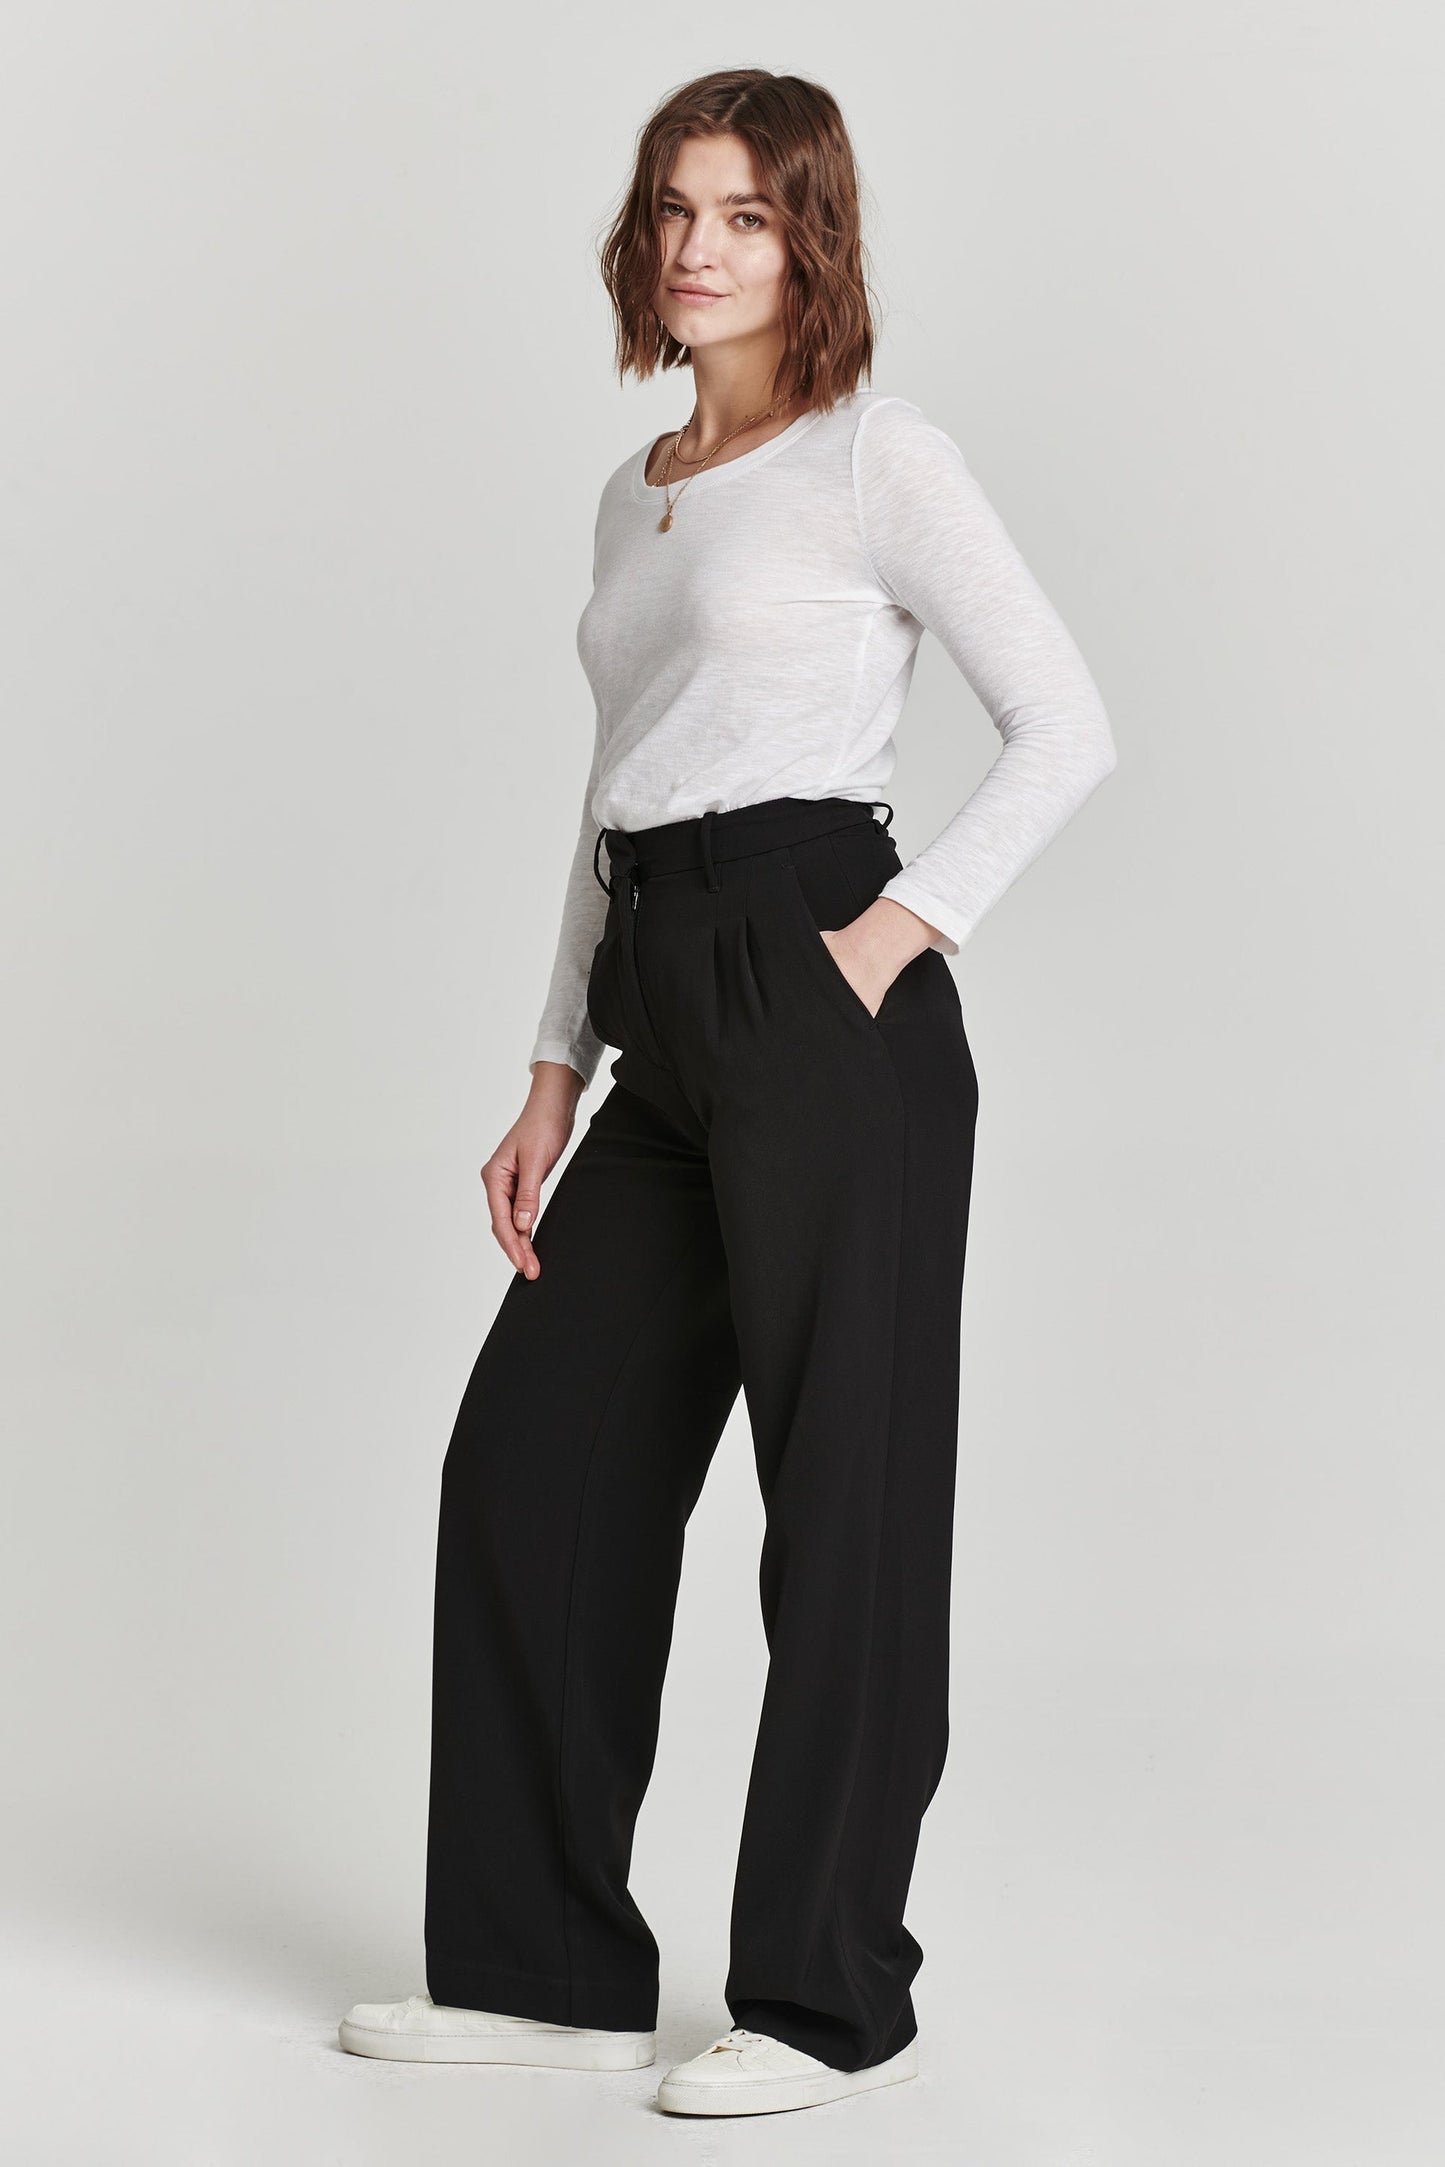 Adelaide Black Trousers